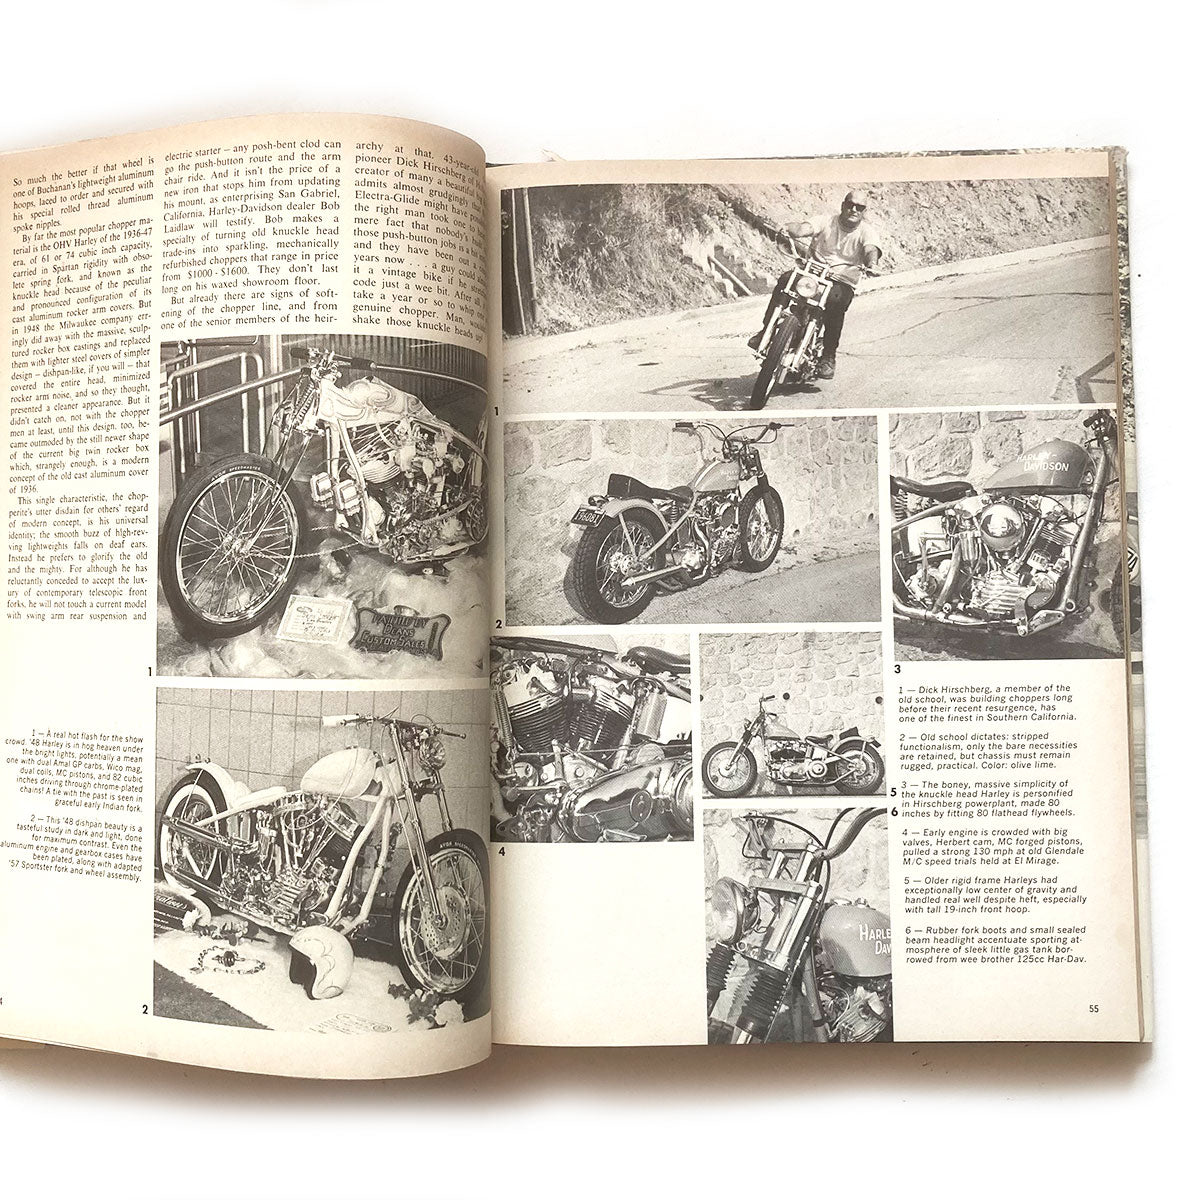 Motorcycle Sport Book no.2, 1967, hardback, complete with dust jacket